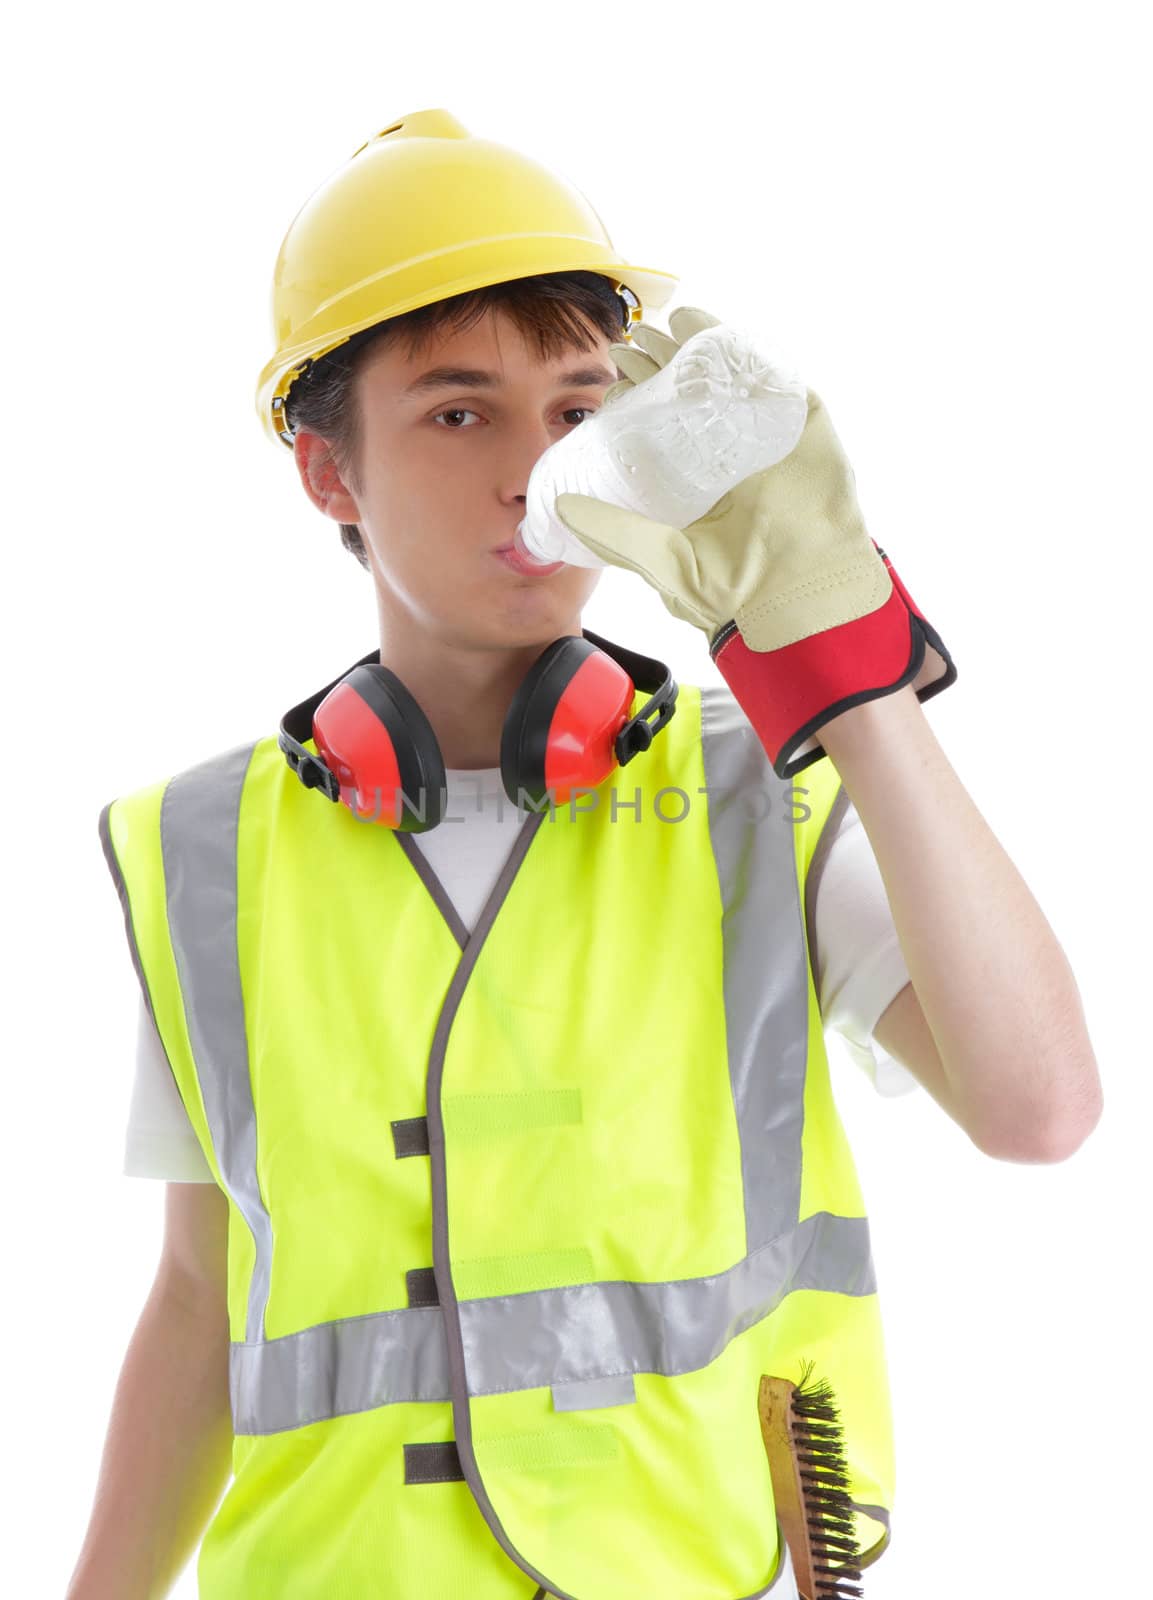 Apprentice trainee builder construction worker drinking ice cold water.  White background.